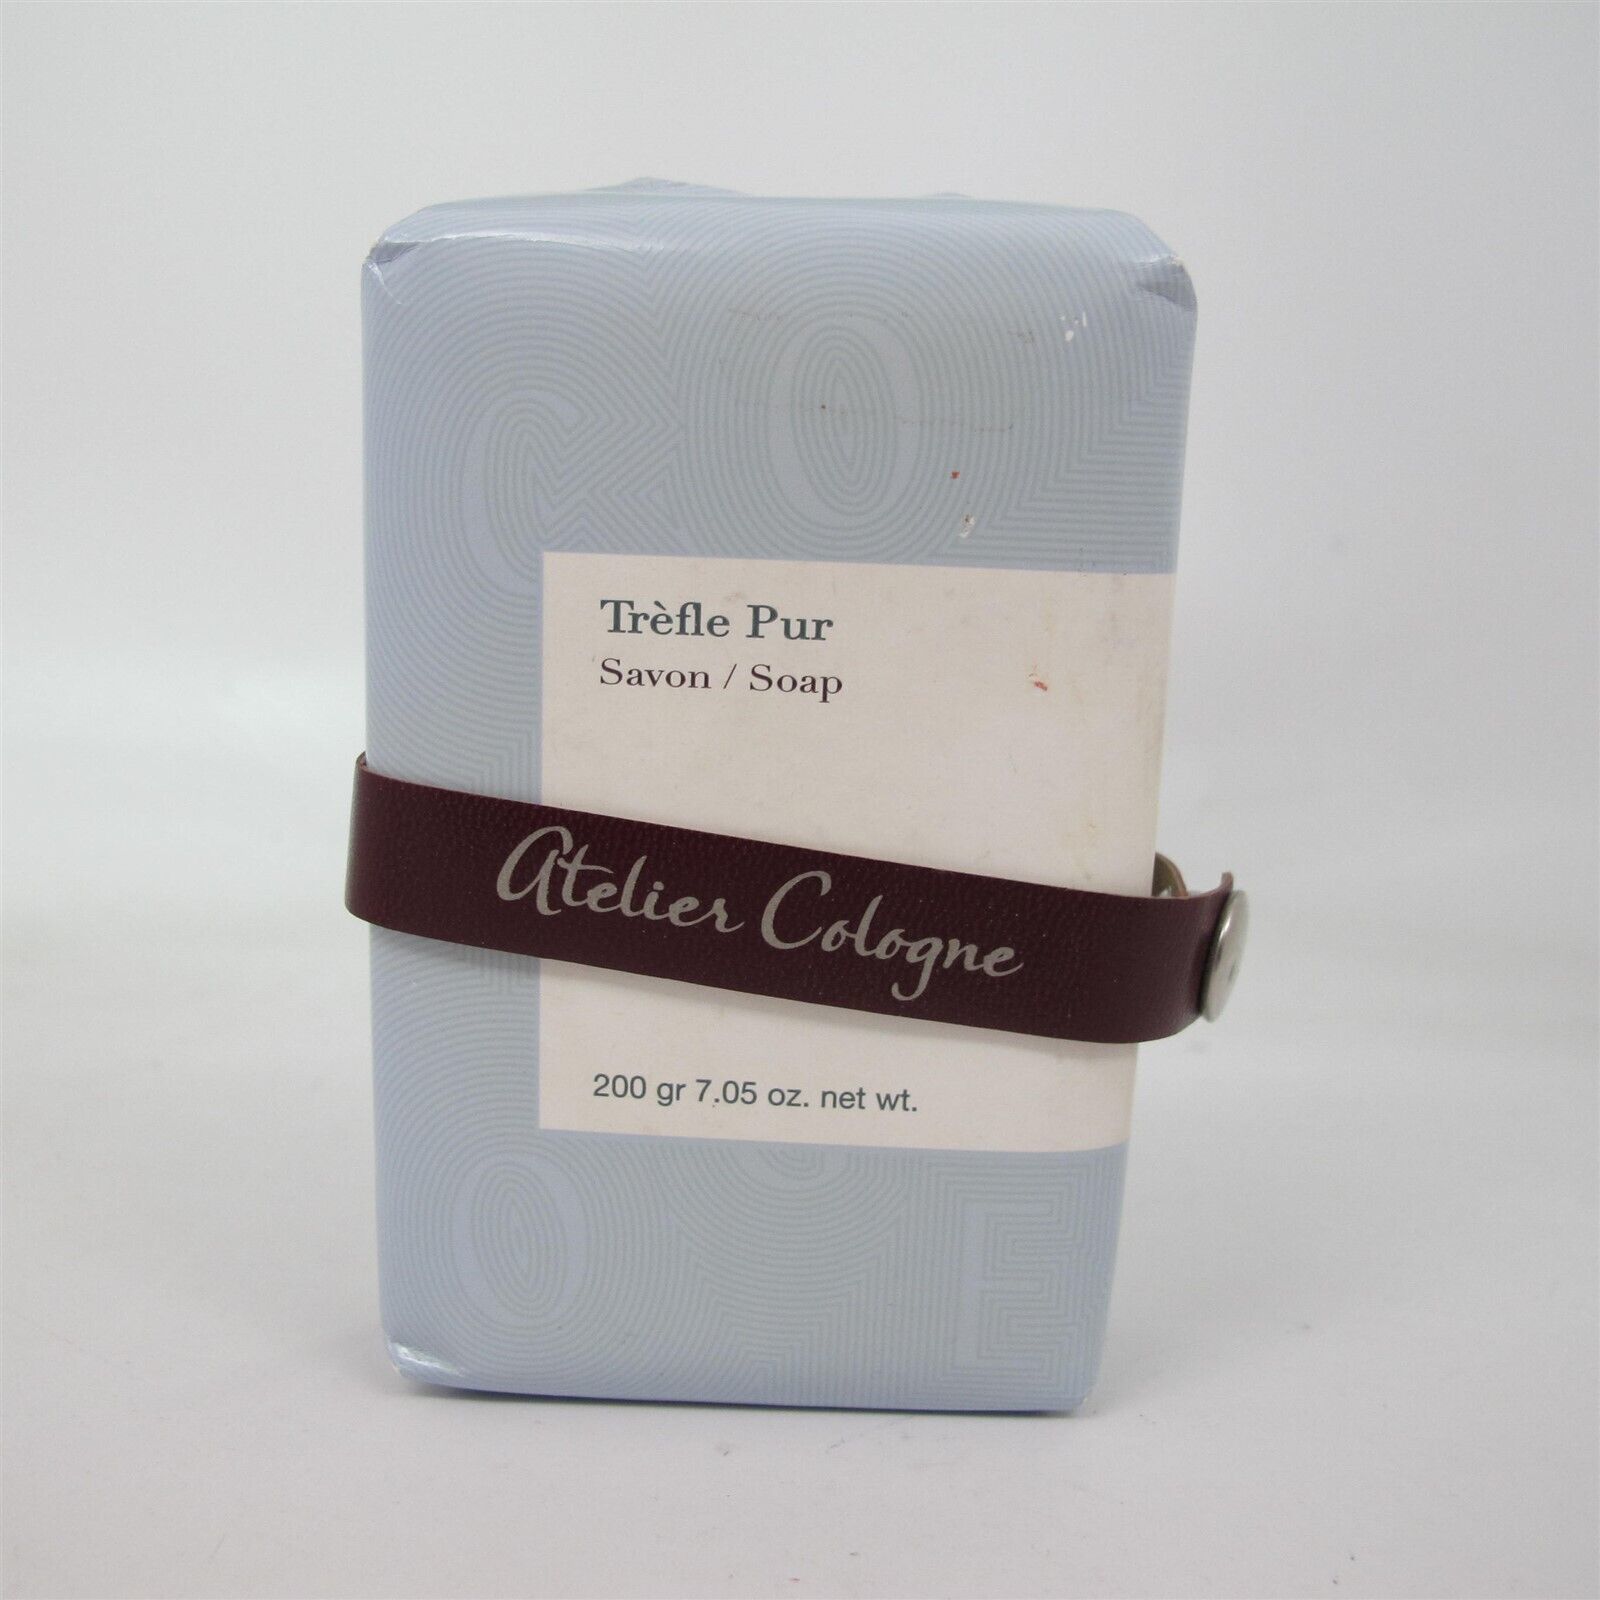 TREFLE PUR by Atelier Cologne 200 g/ 7.05 oz Perfumed Soap - $29.69